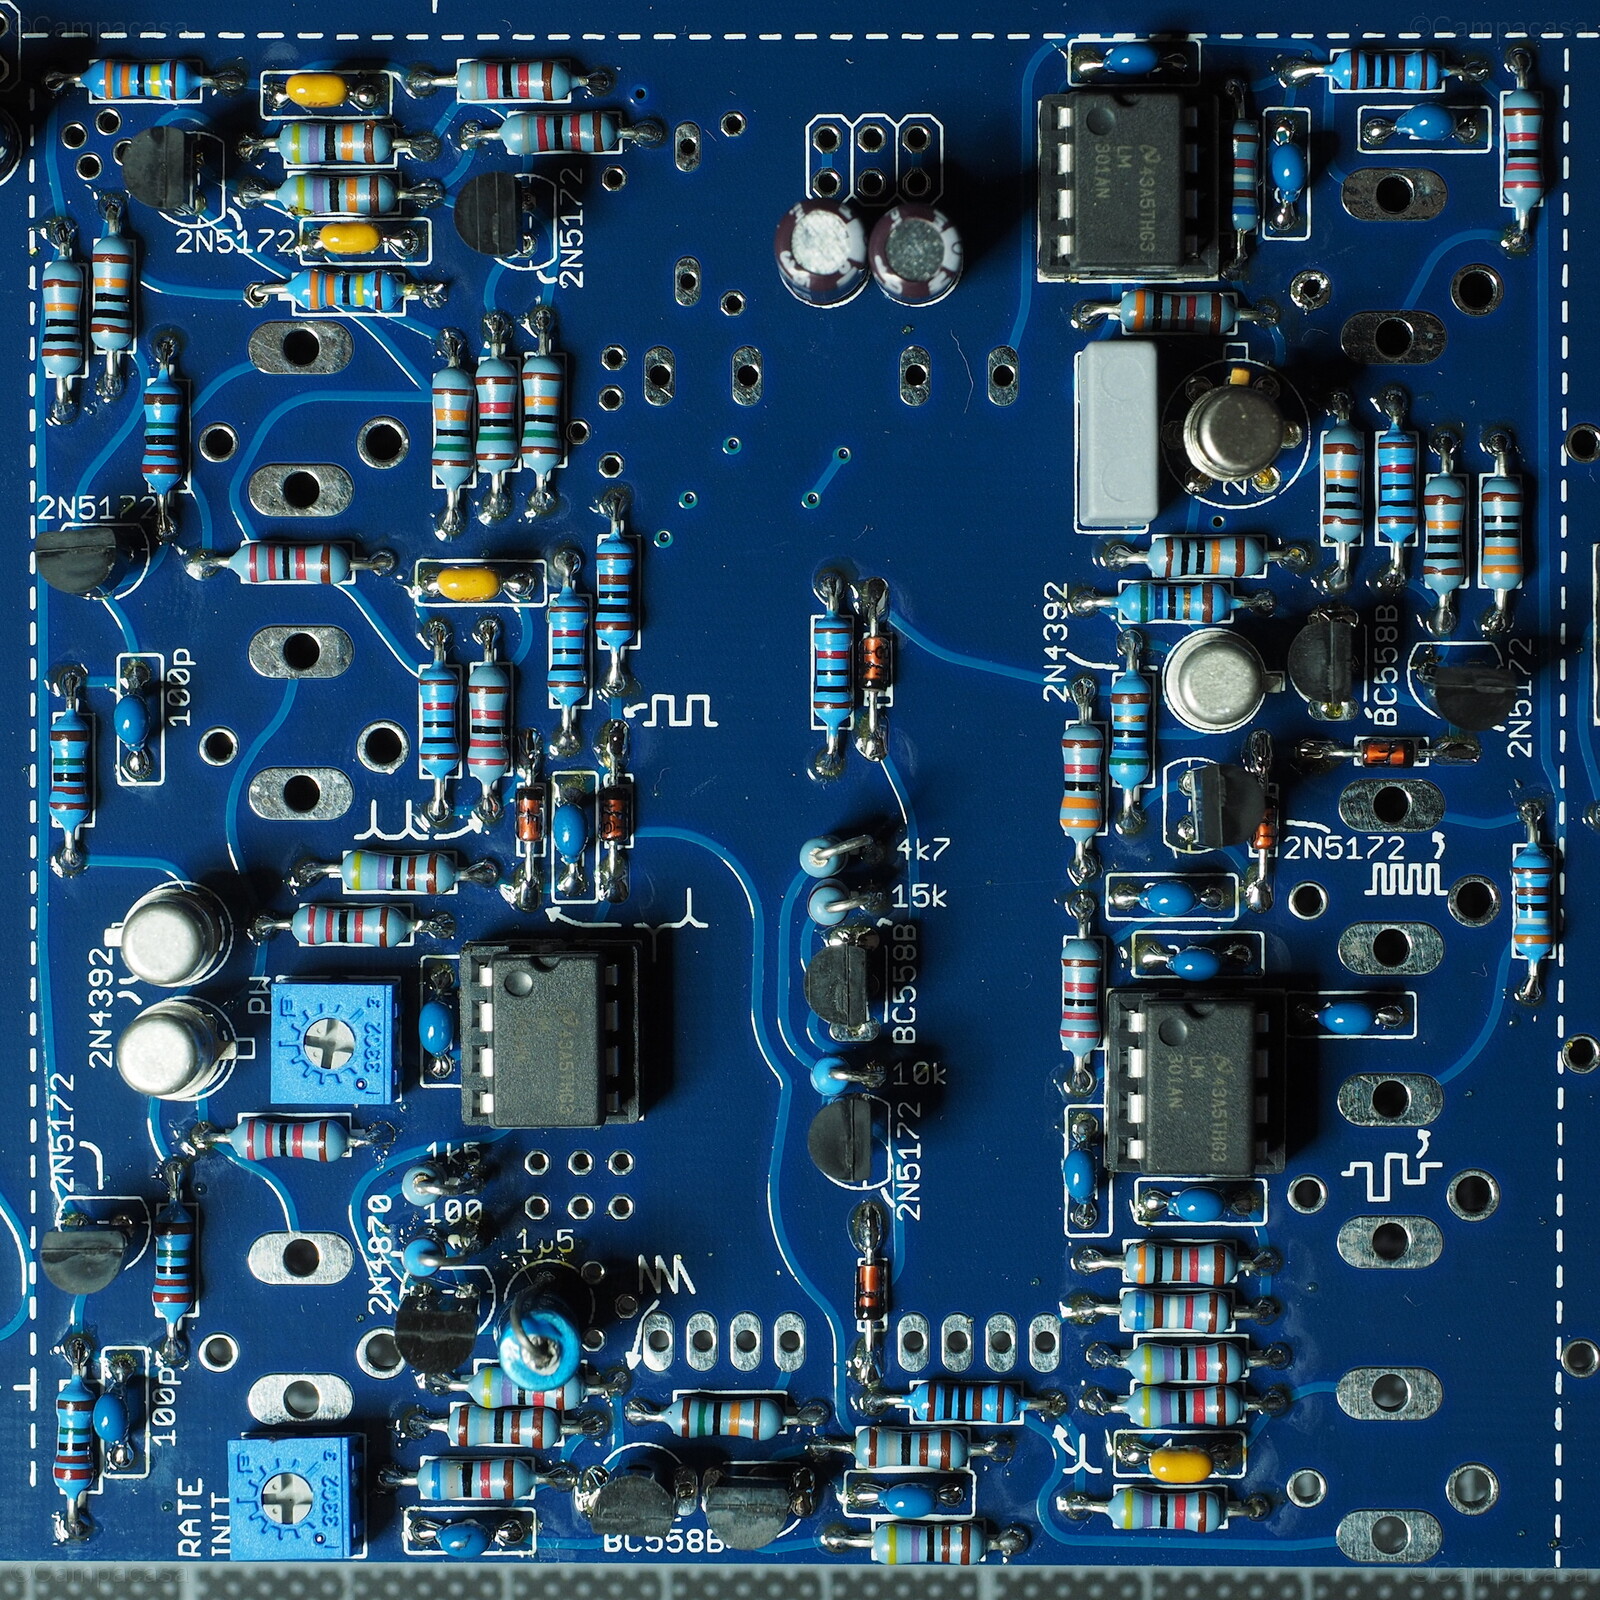 Main Board, Sample&Hold, Internal Clock and Analog Switch Completed